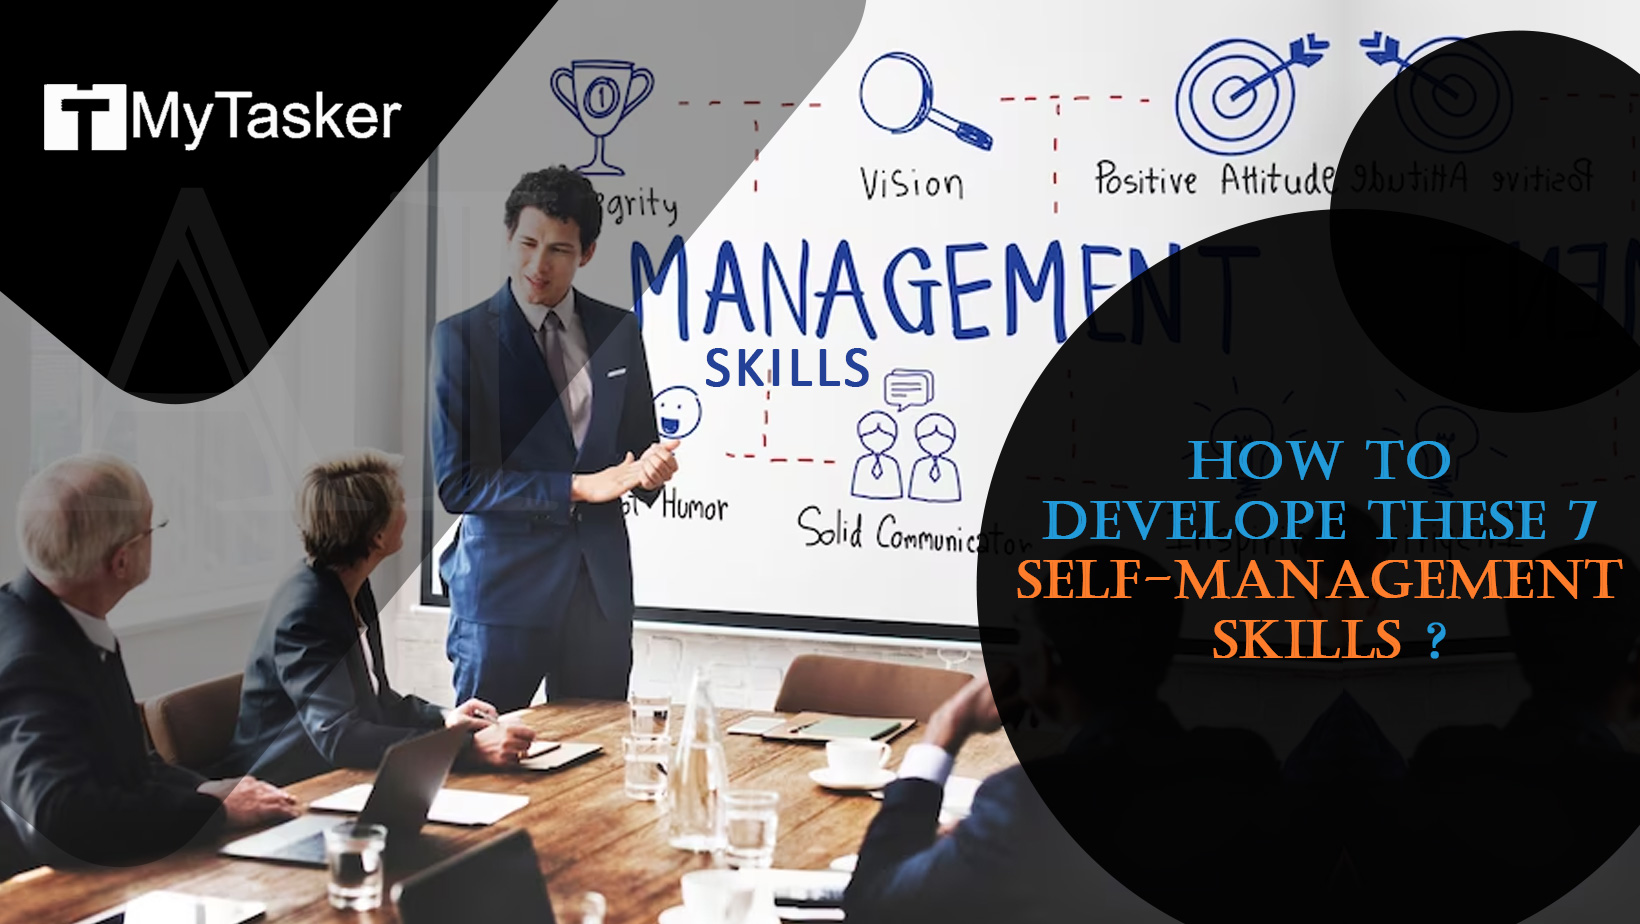 How to Develop These 7 Self-Management Skills?